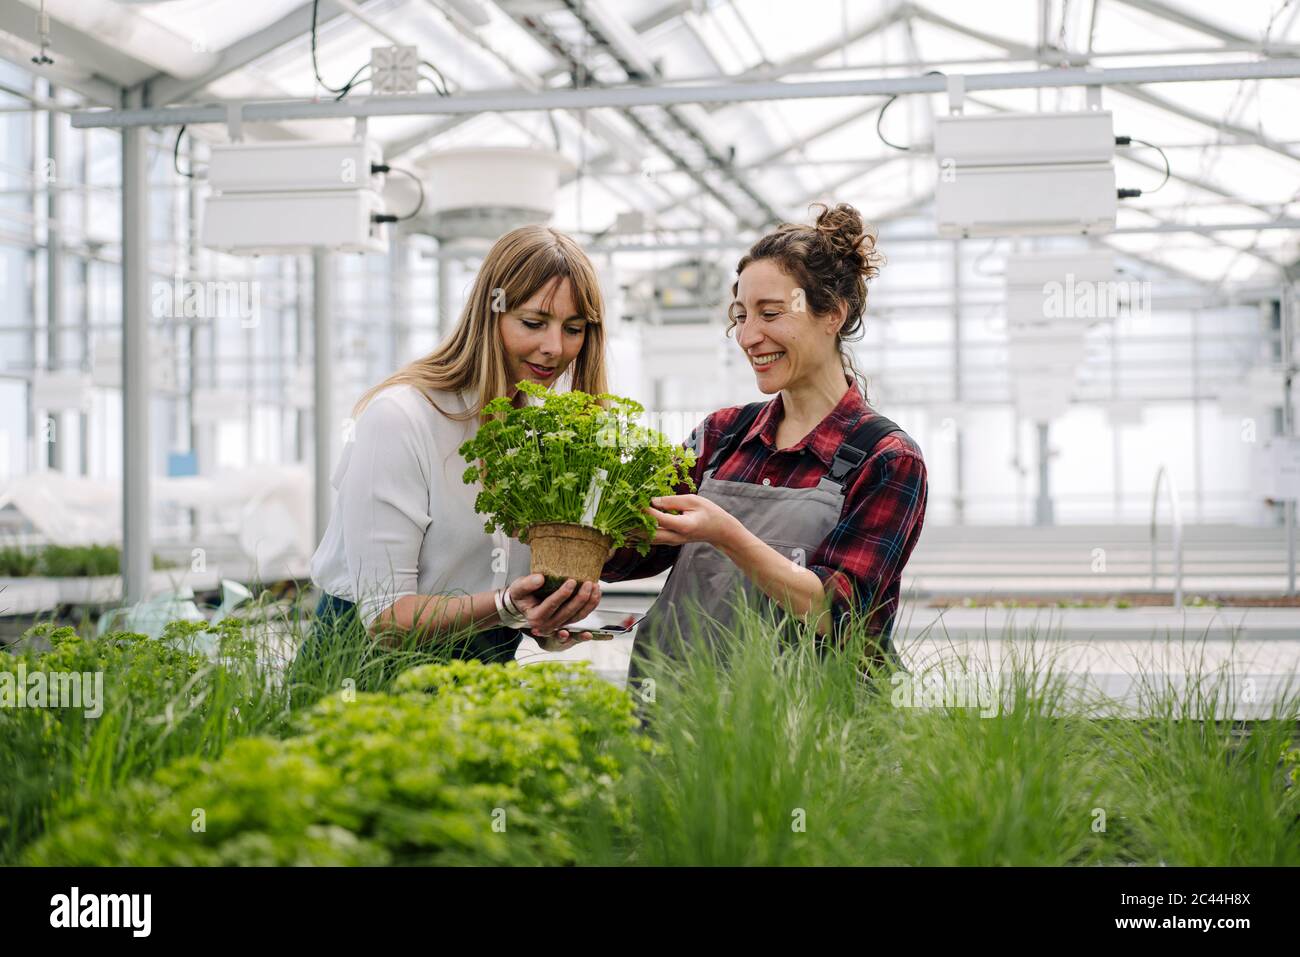 Gardener and businesswoman with parsley plant in greenhouse of a gardening shop Stock Photo